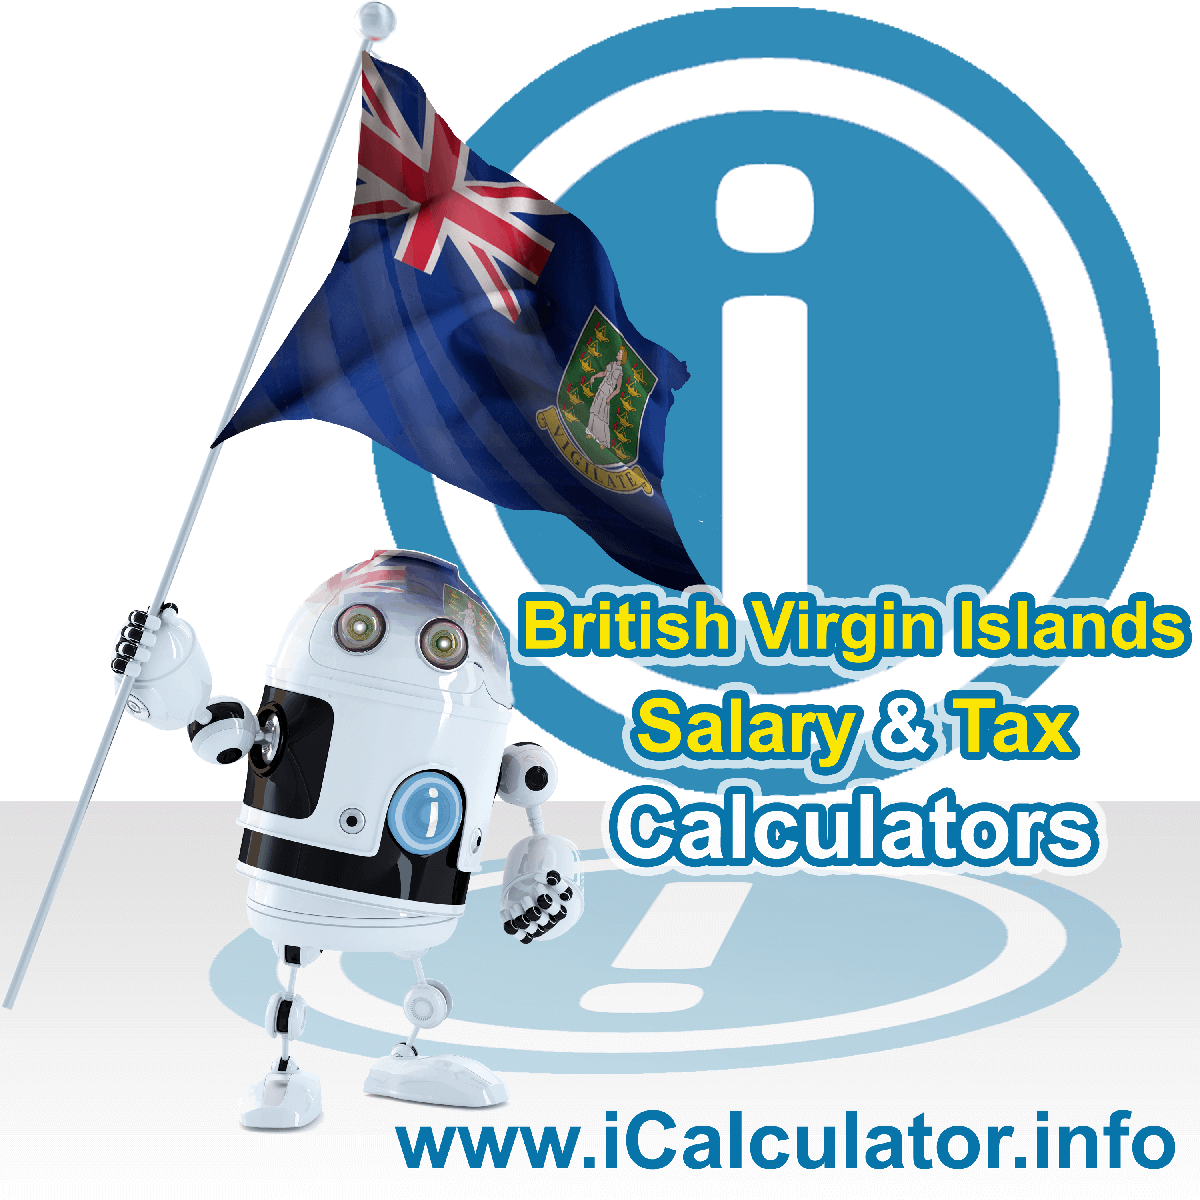 British Virgin Islands Wage Calculator. This image shows the British Virgin Islands flag and information relating to the tax formula for the British Virgin Islands Tax Calculator